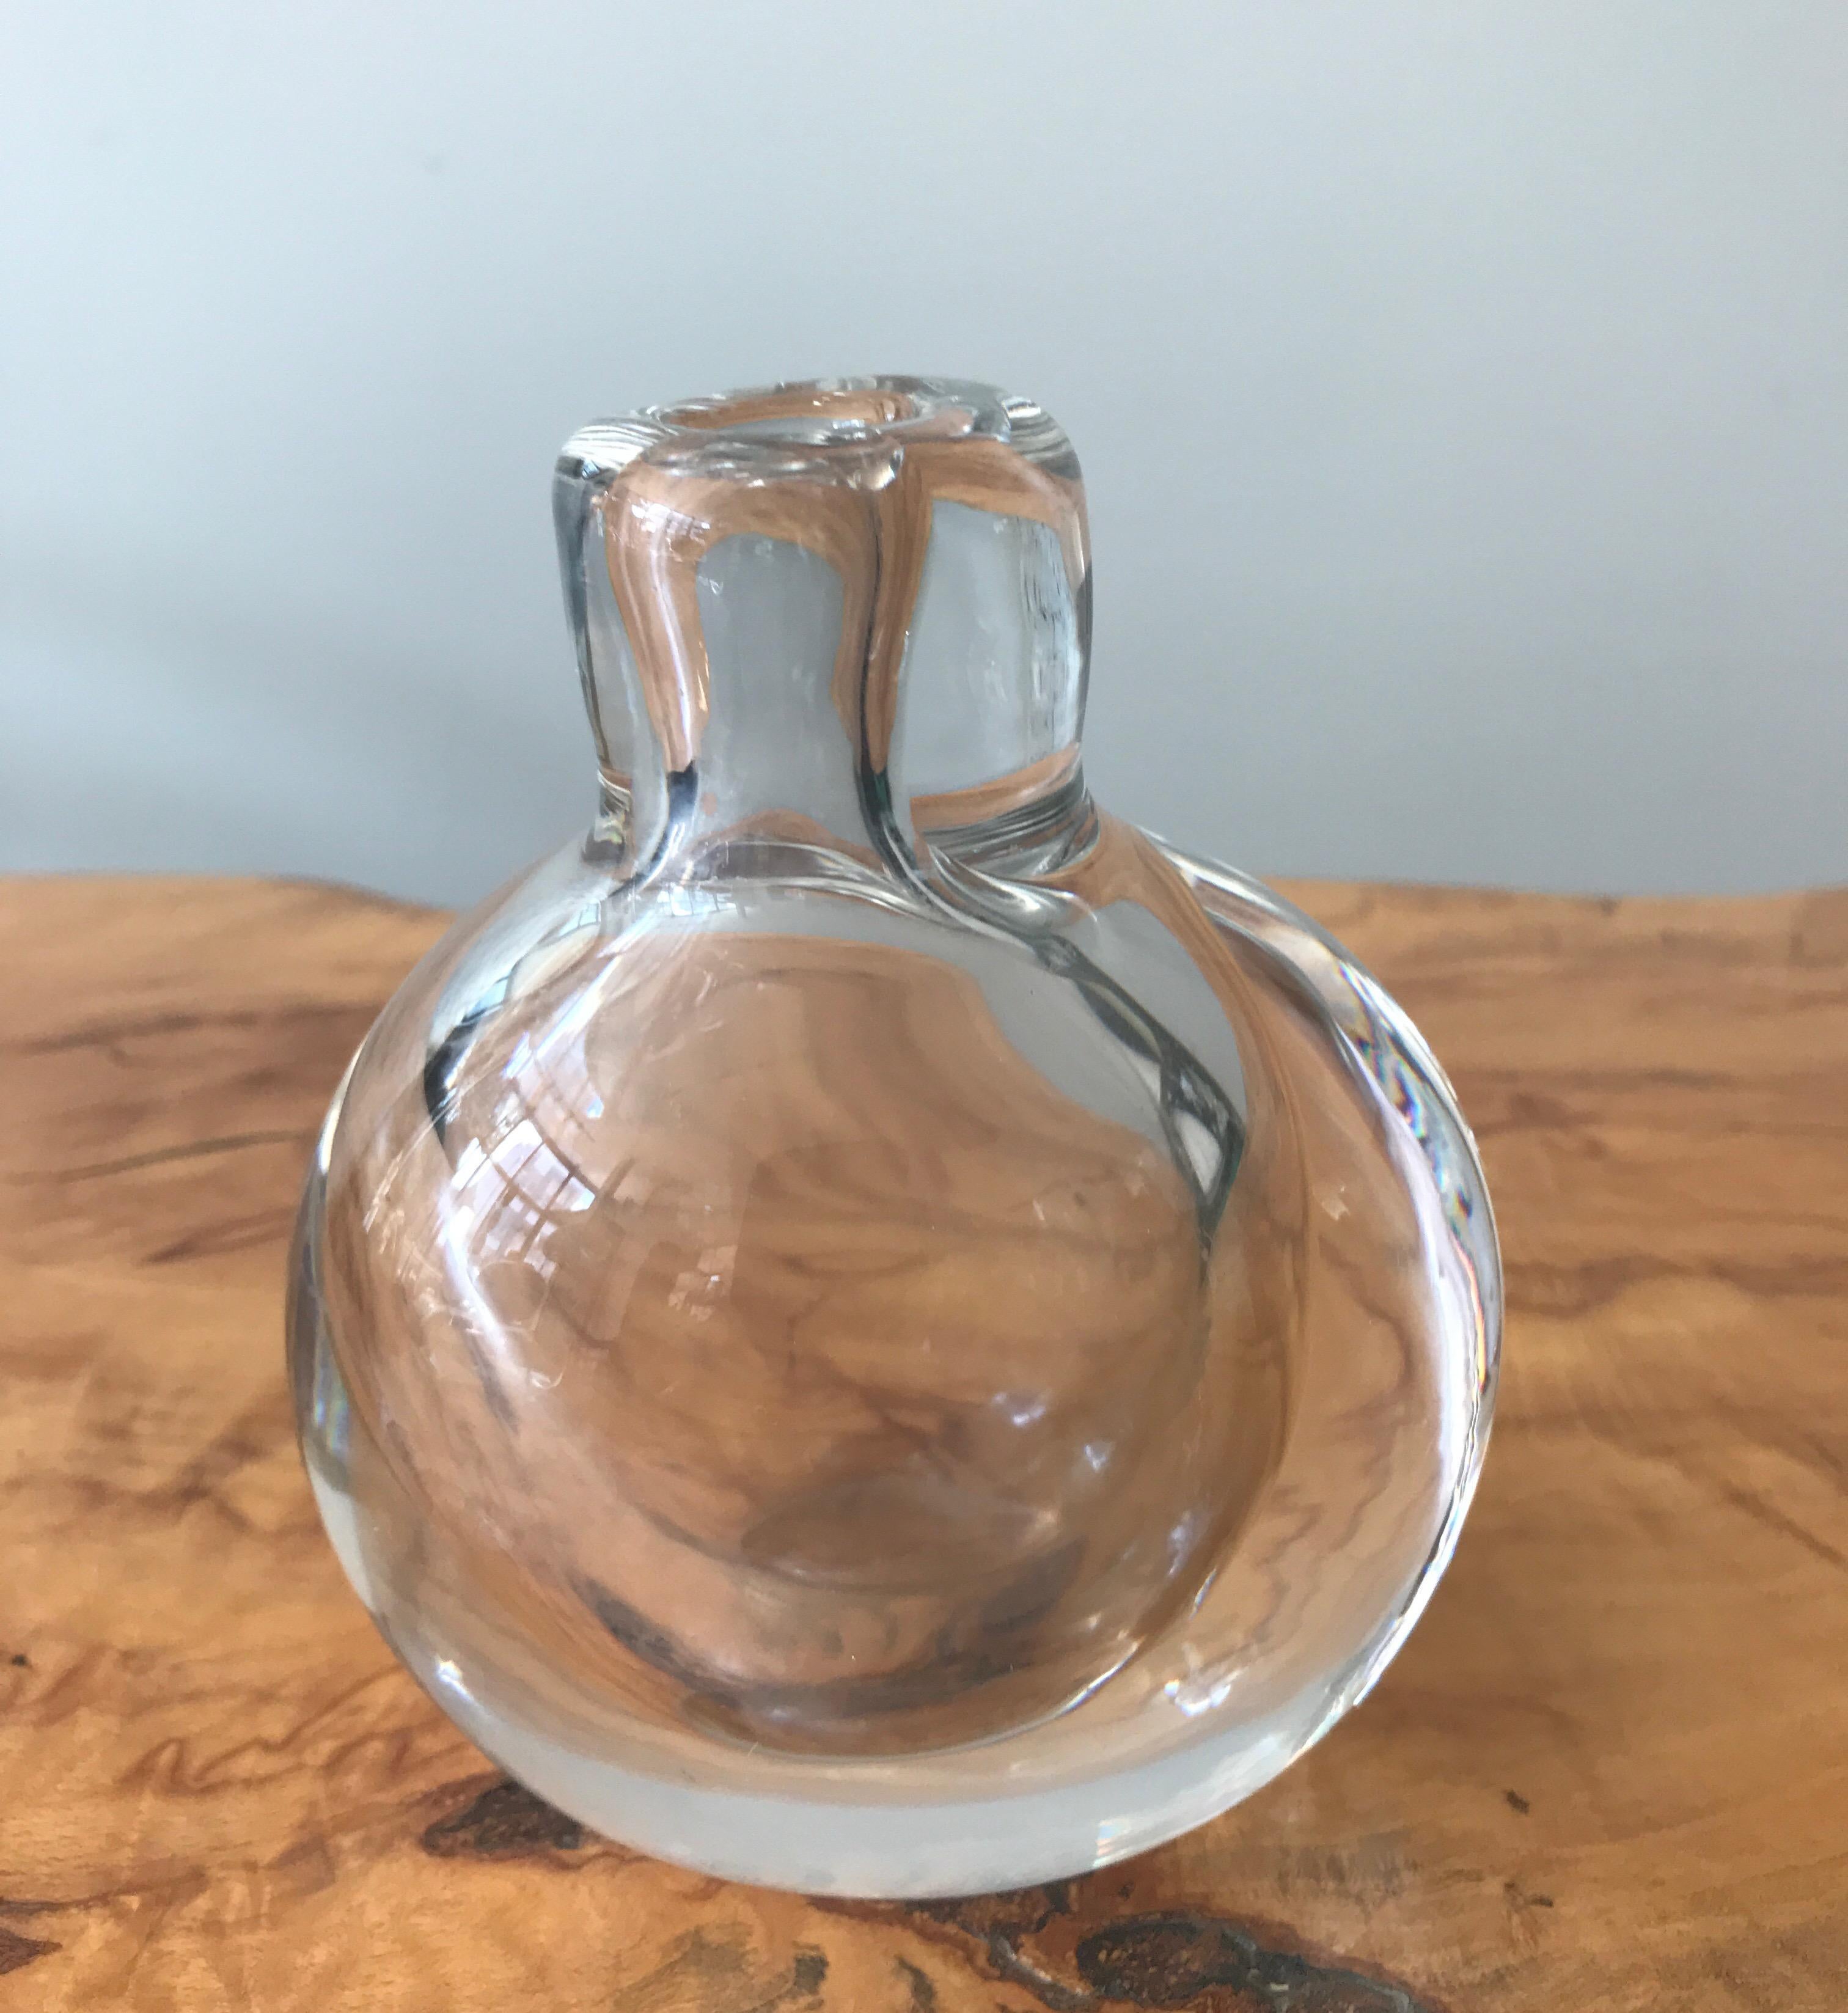 Handblown thick clear glass Kosta Boda vase by pioneering Swedish art glass
Master Vicki Lindstrand.
The ovoid vase has thick artfully formed asymmetrical walls.
Signed on the bottom.